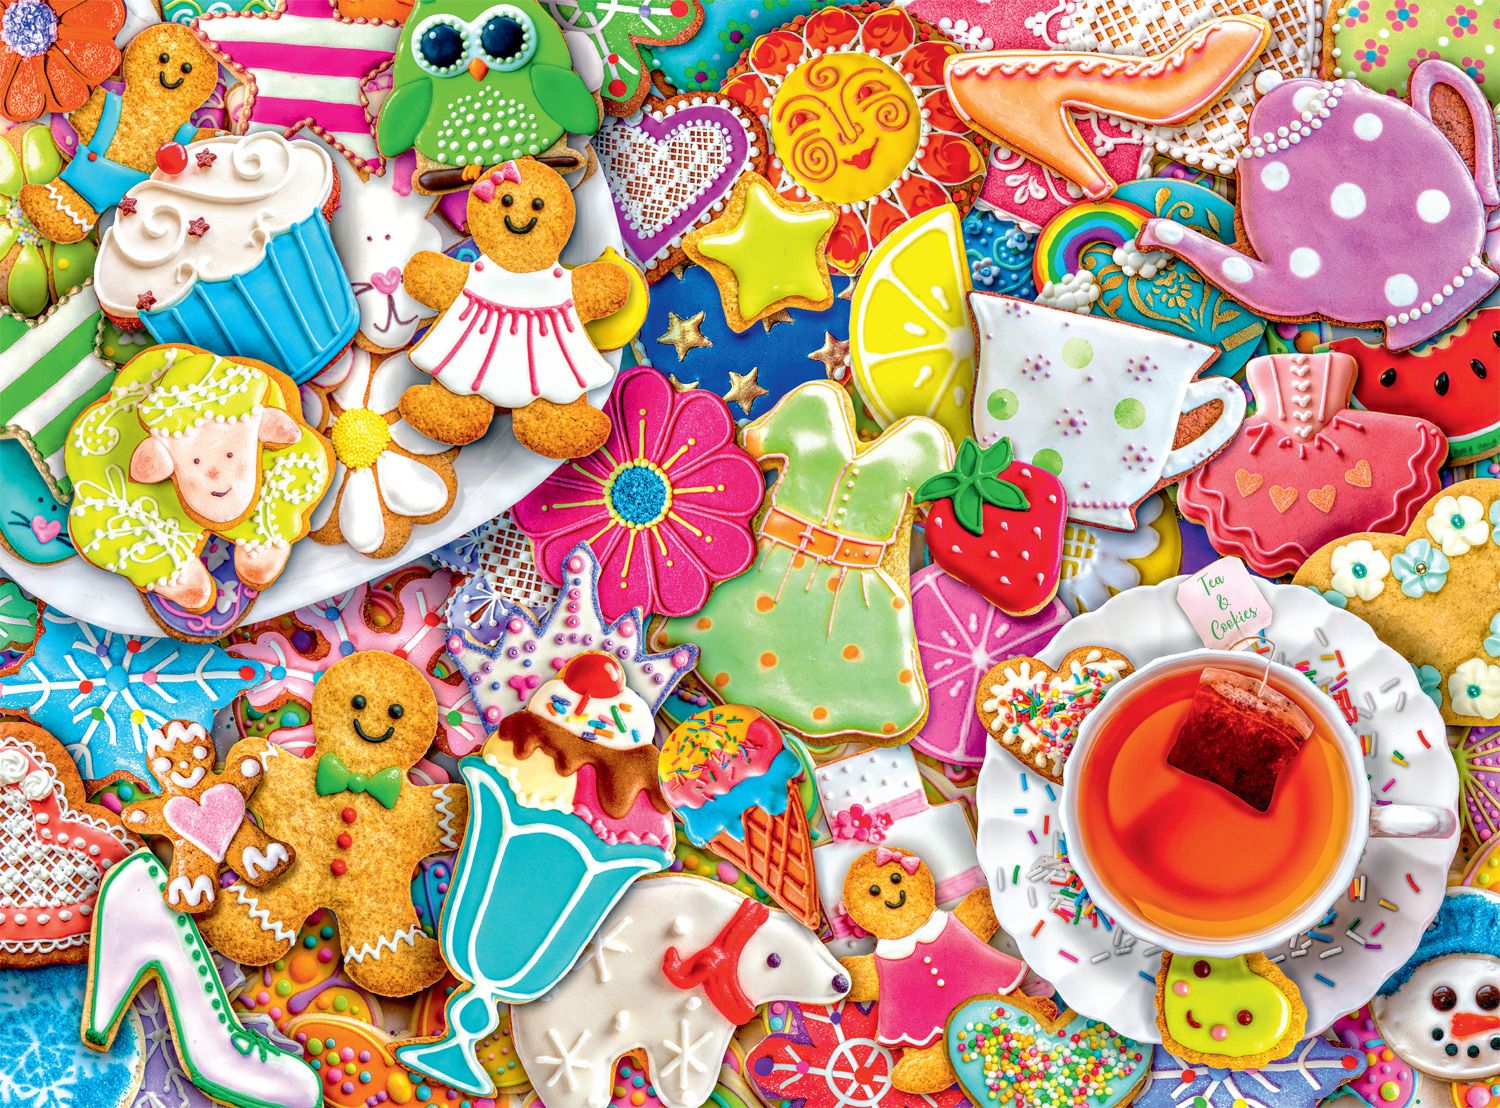 Tea and Cookies - Scratch and Dent Dessert & Sweets Jigsaw Puzzle